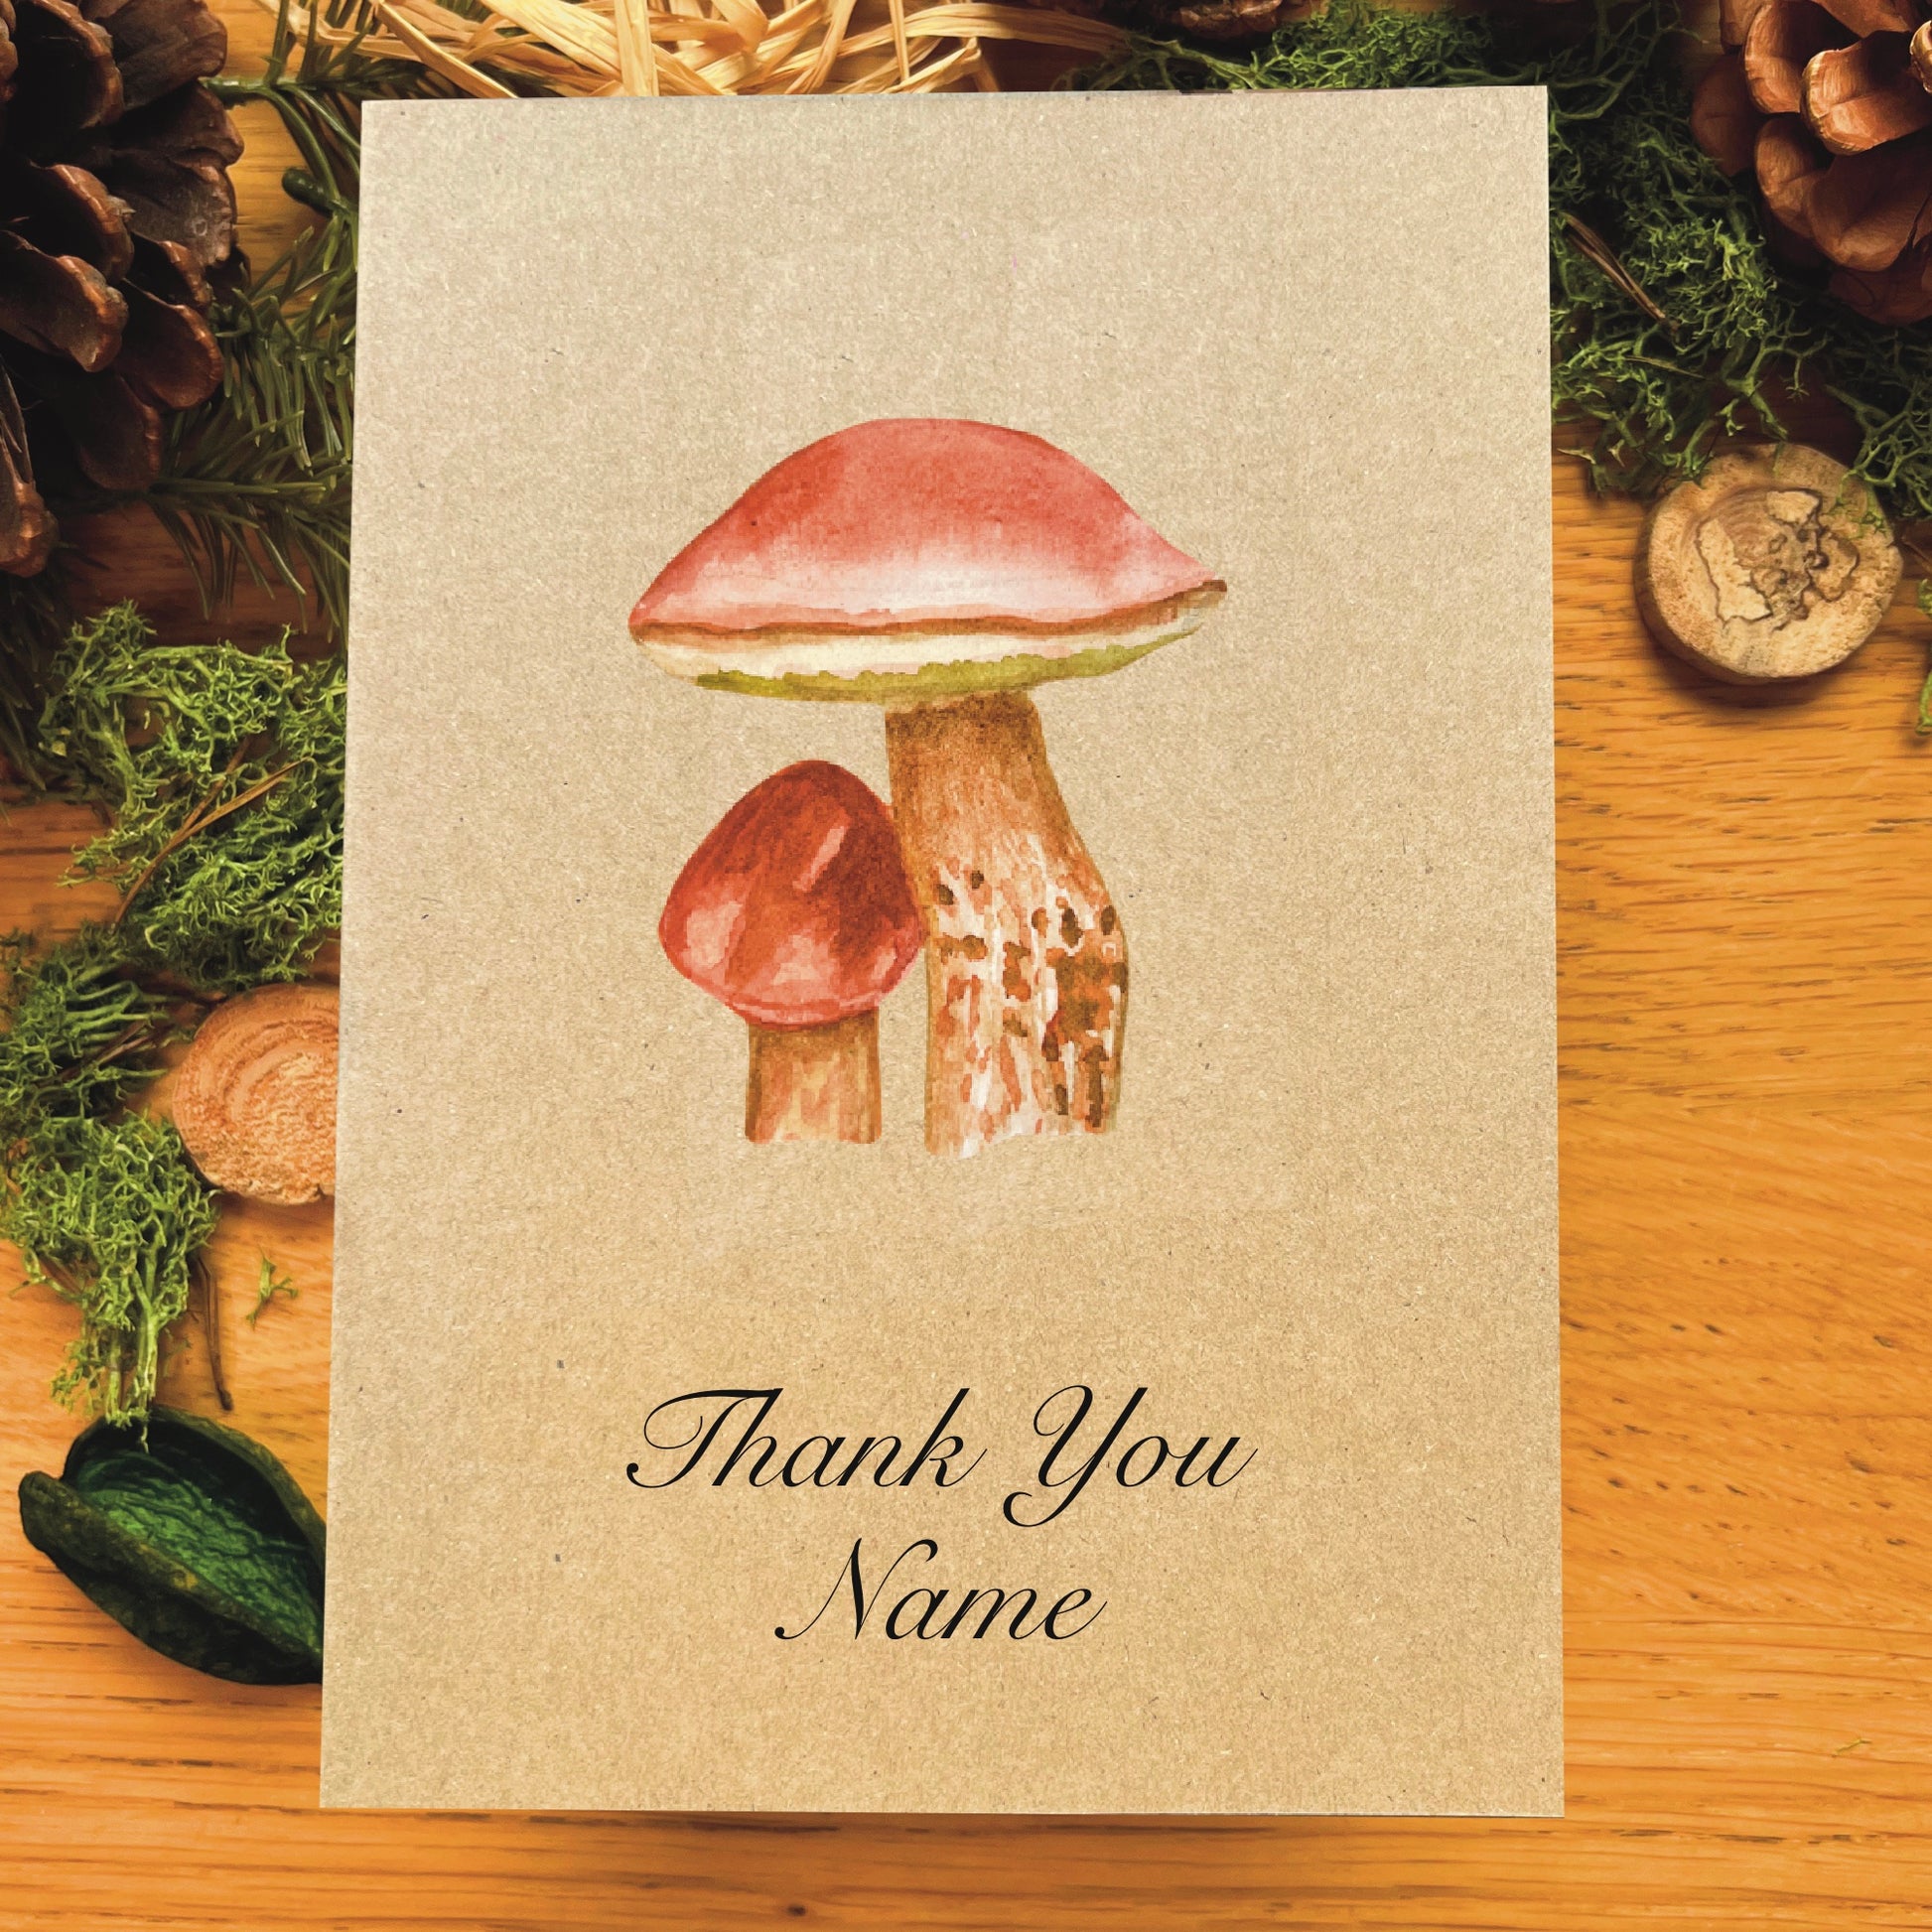 Penny bun mushroom illustrated in watercolour attached to Manila recycled greetings card on a wooden desk, with text script Thank You Name underneath the illustration